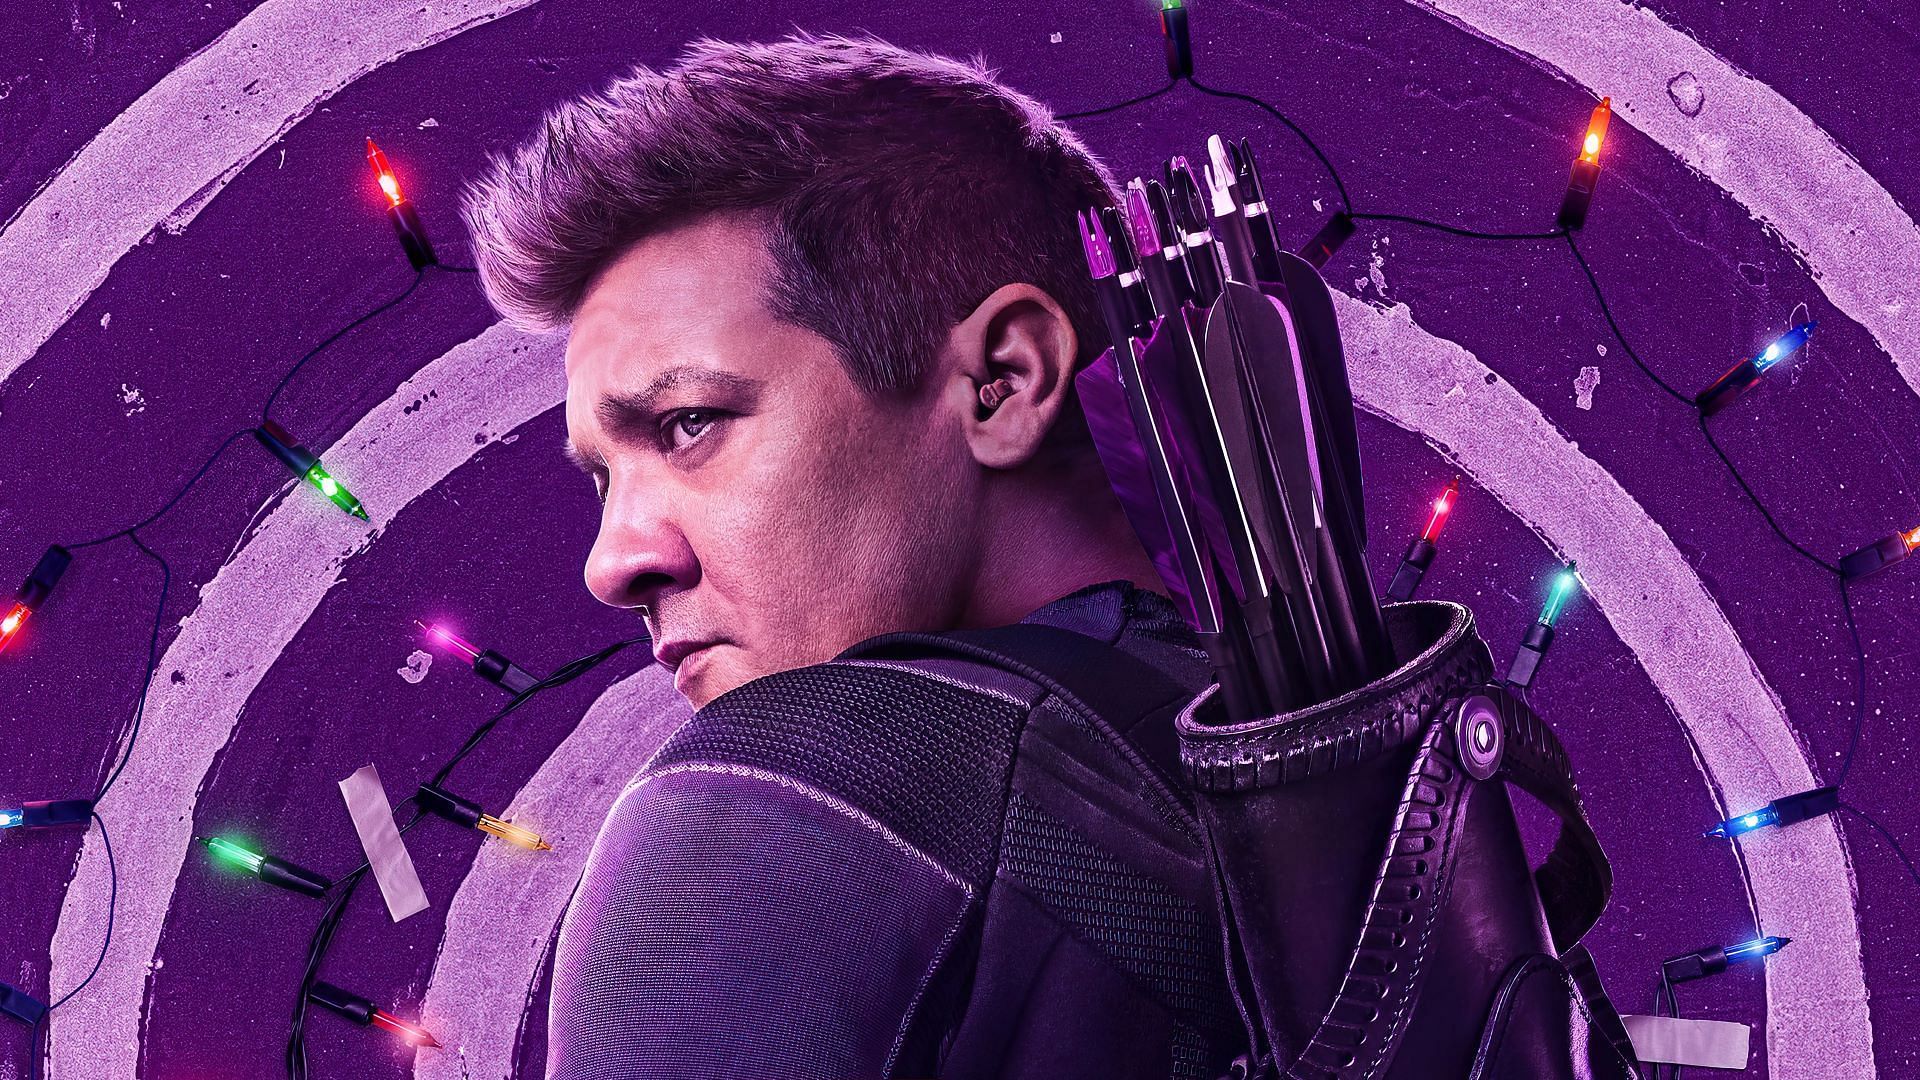 Jeremy Renner says he will return as Hawkeye in a heartbeat if Marvel asked him to (Image via Marvel)